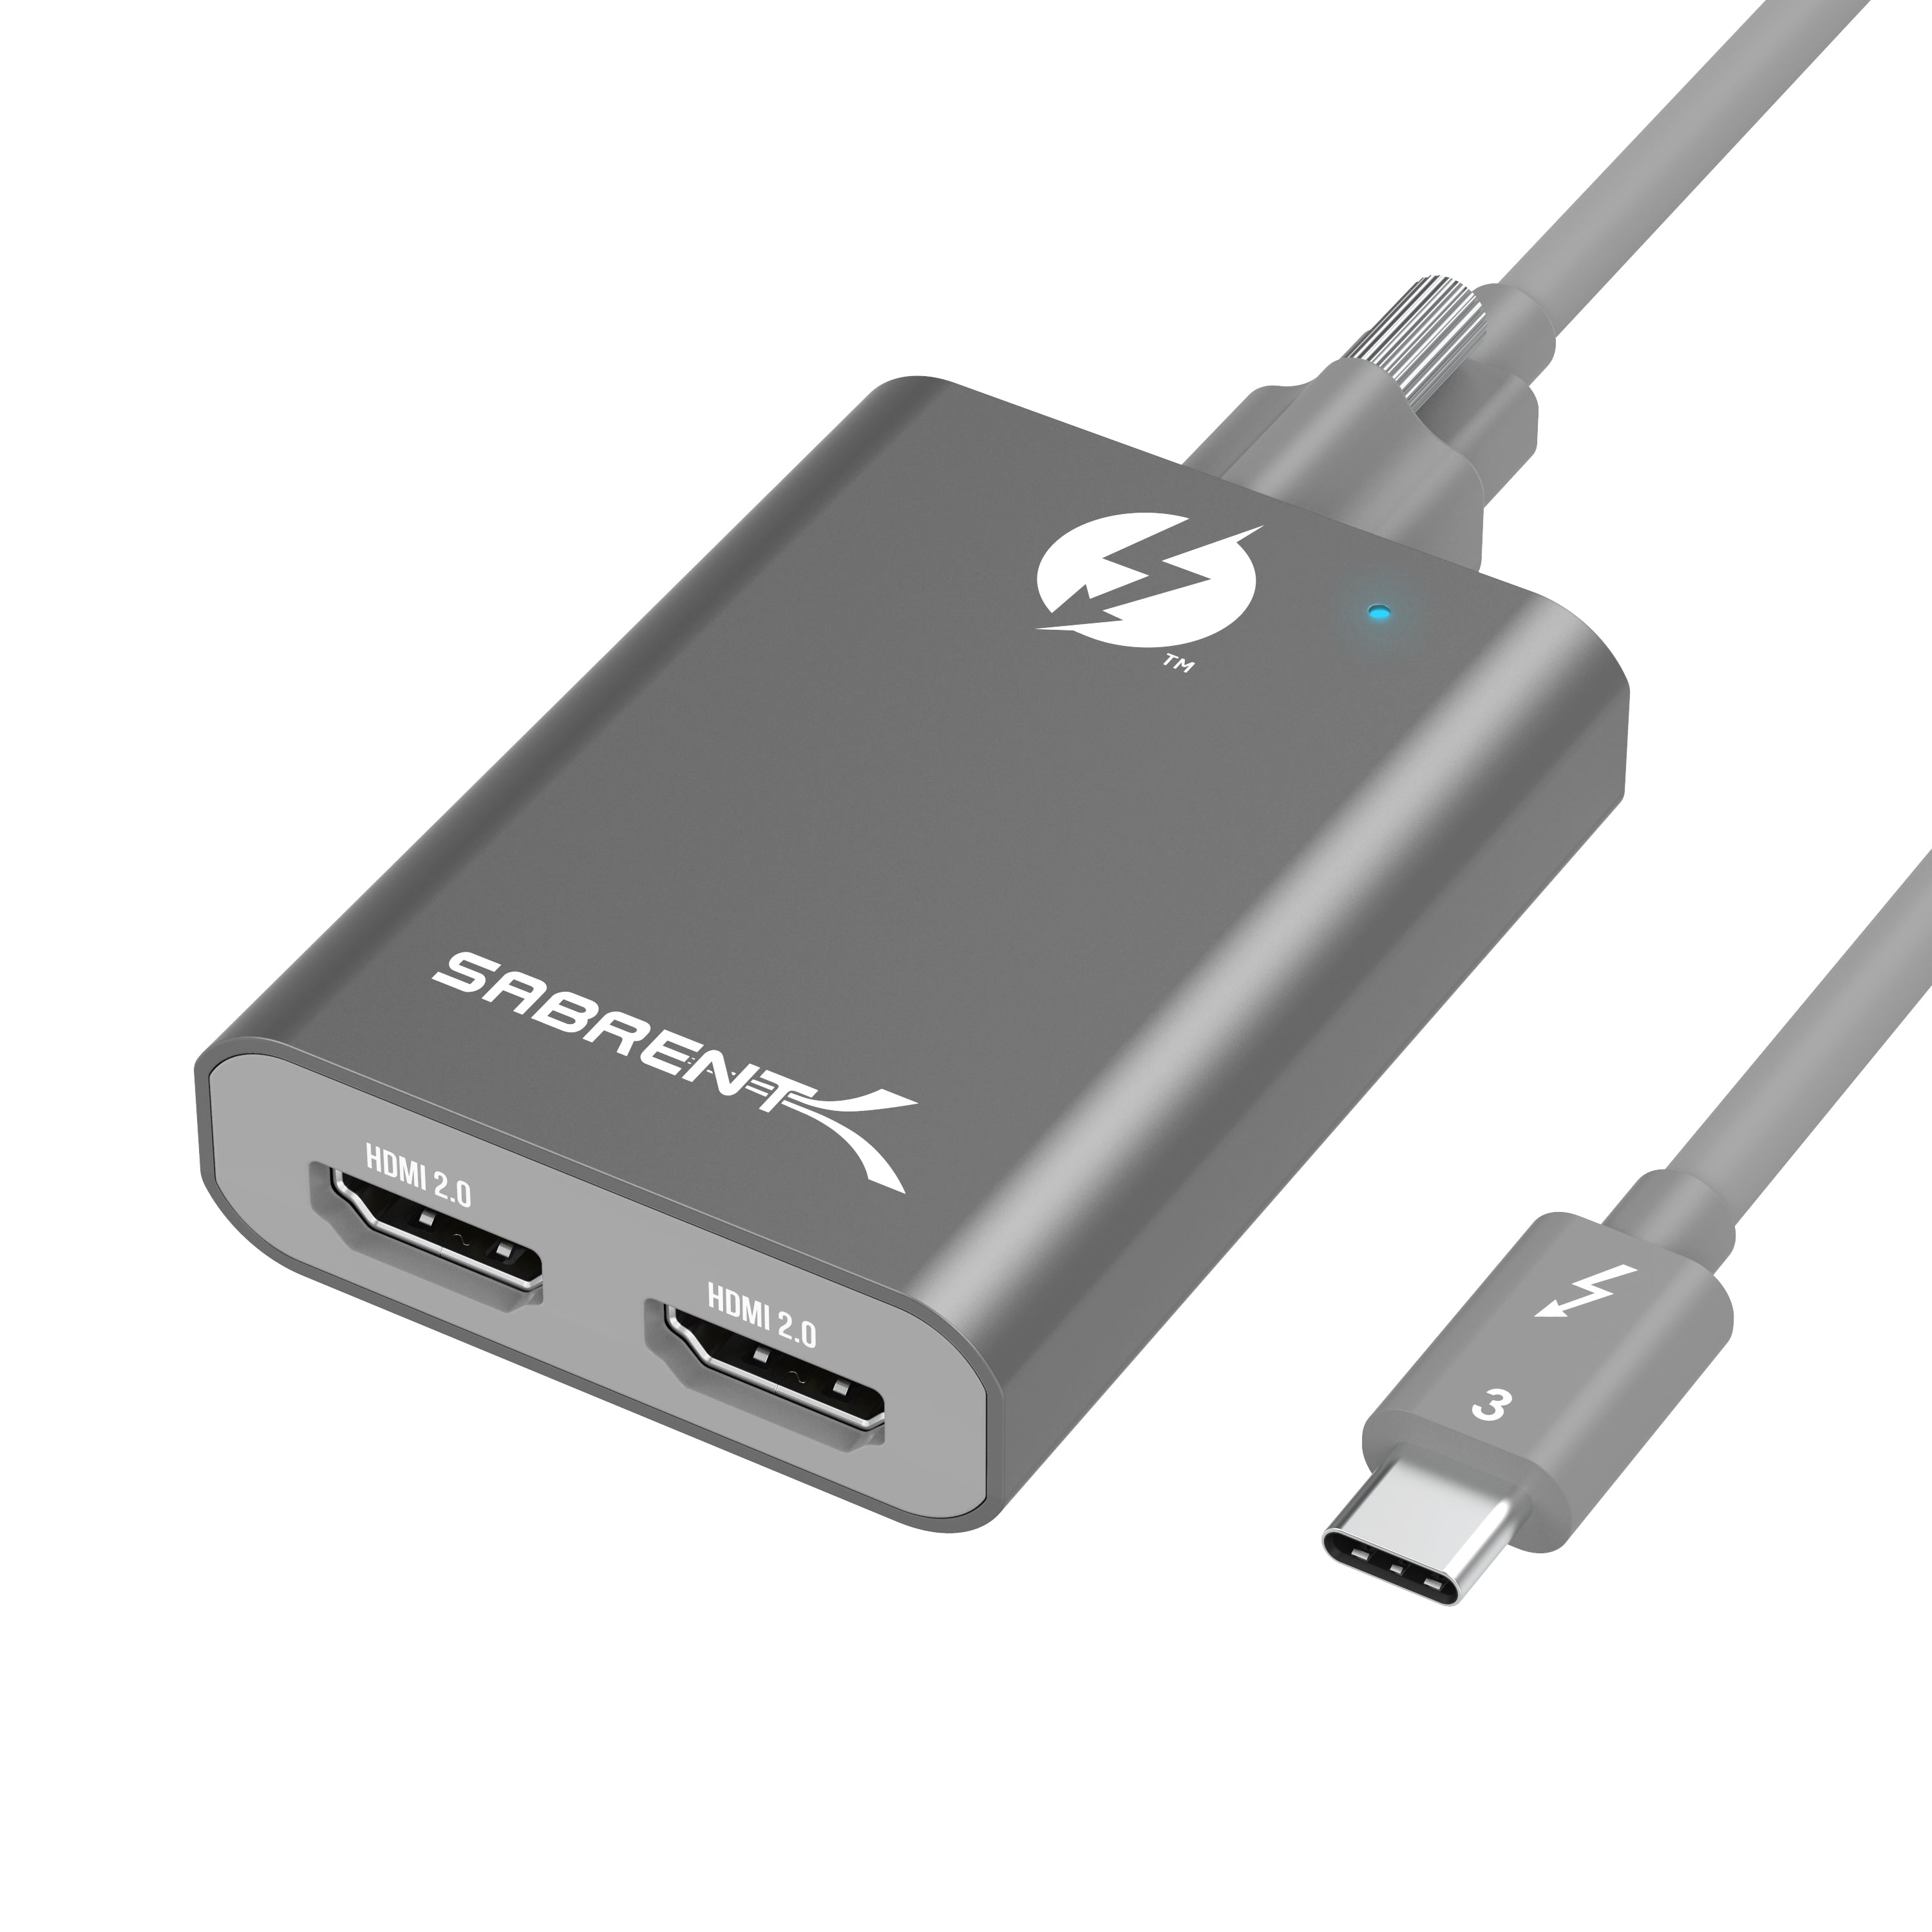 Koreaans warmte Beoefend Thunderbolt 3 to Dual HDMI 2.0 Adapter - Sabrent